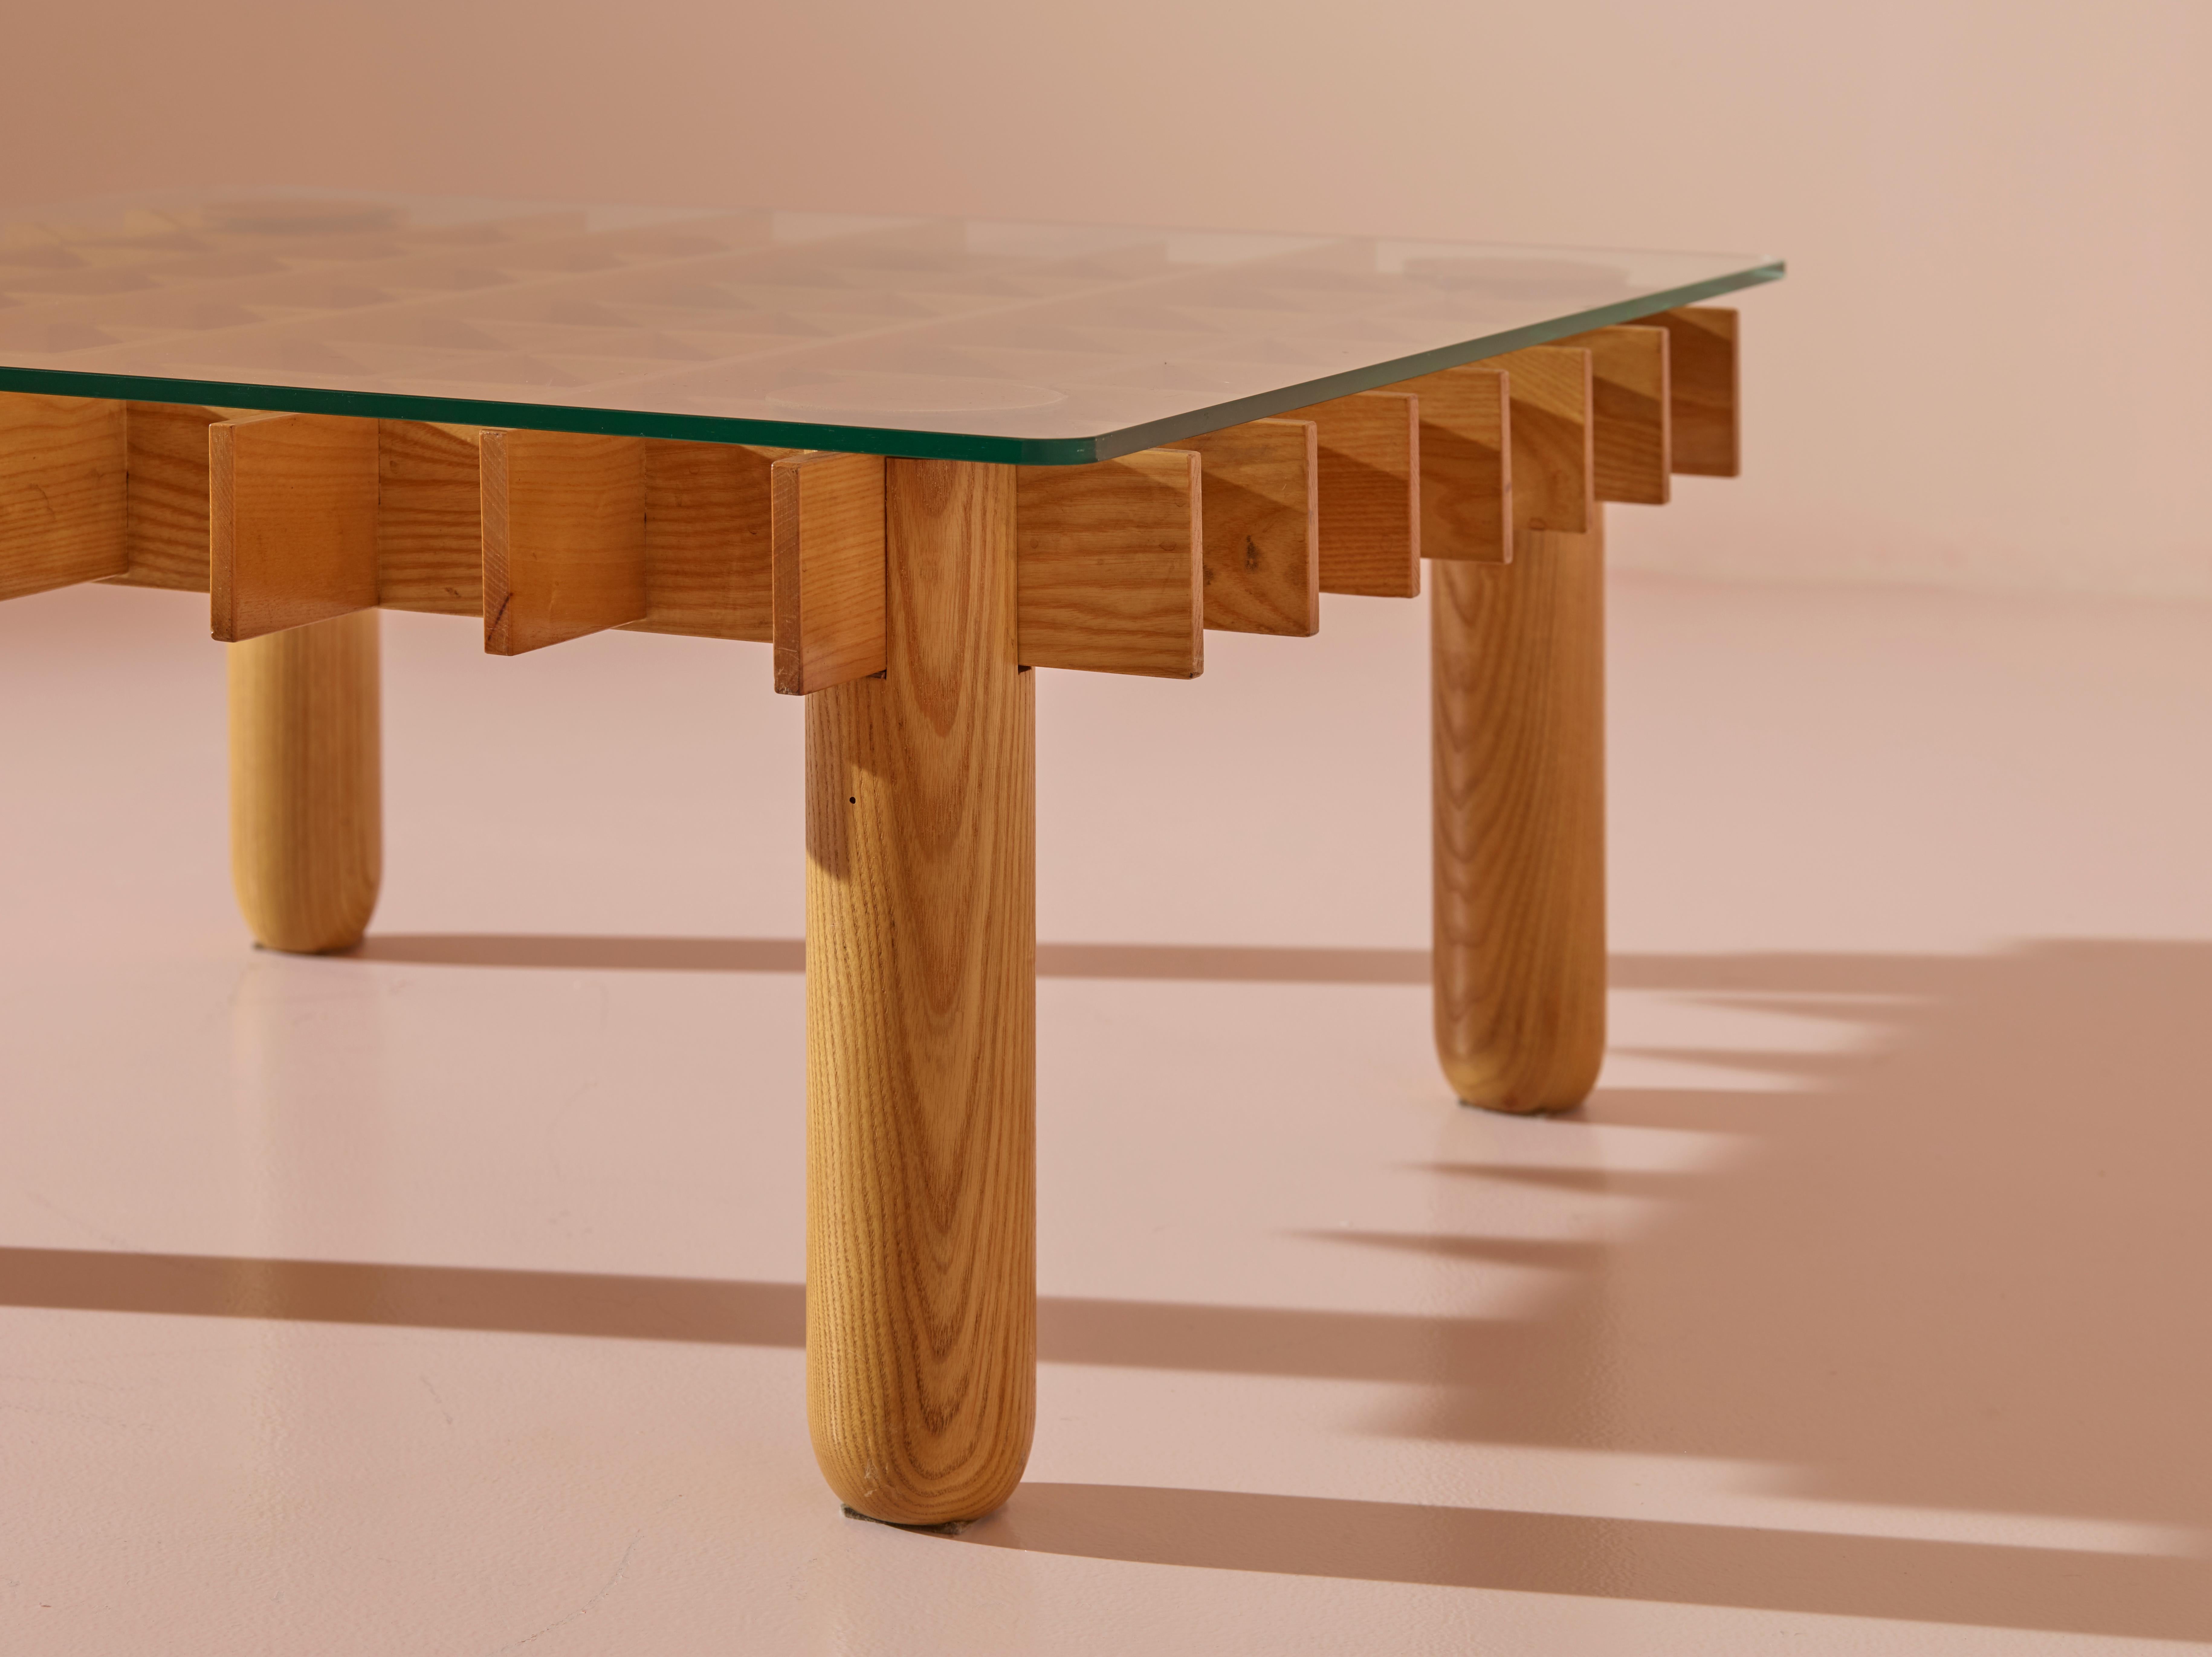 Gianfranco Frattini Kyoto Coffee Table for Ghiande, 1970s, Distributed by Knoll In Good Condition For Sale In Chiavari, Liguria